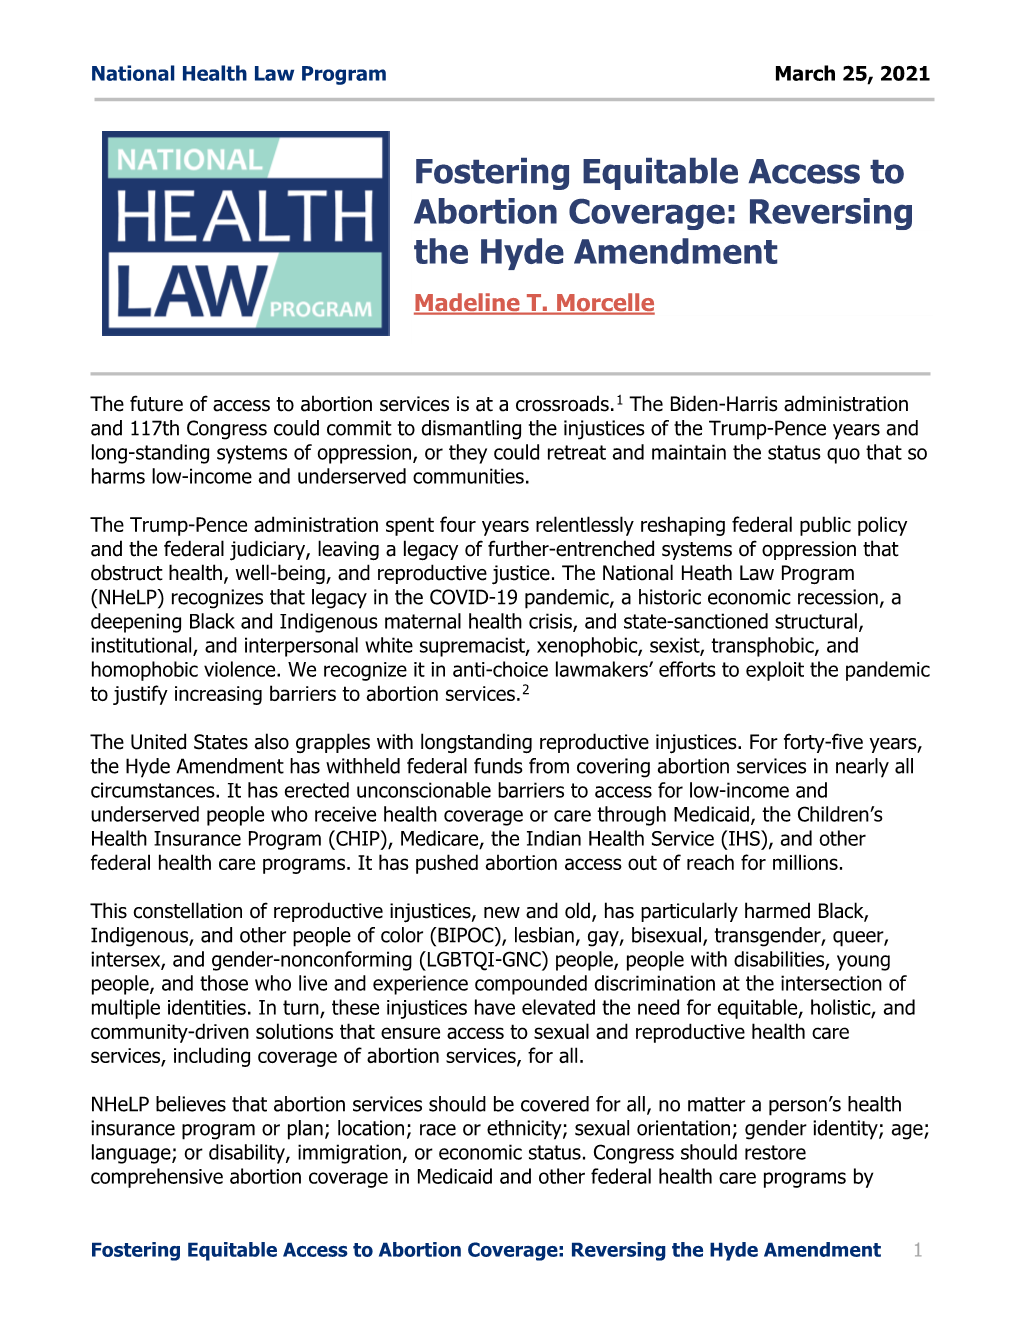 Fostering Equitable Access to Abortion Coverage: Reversing the Hyde Amendment Madeline T